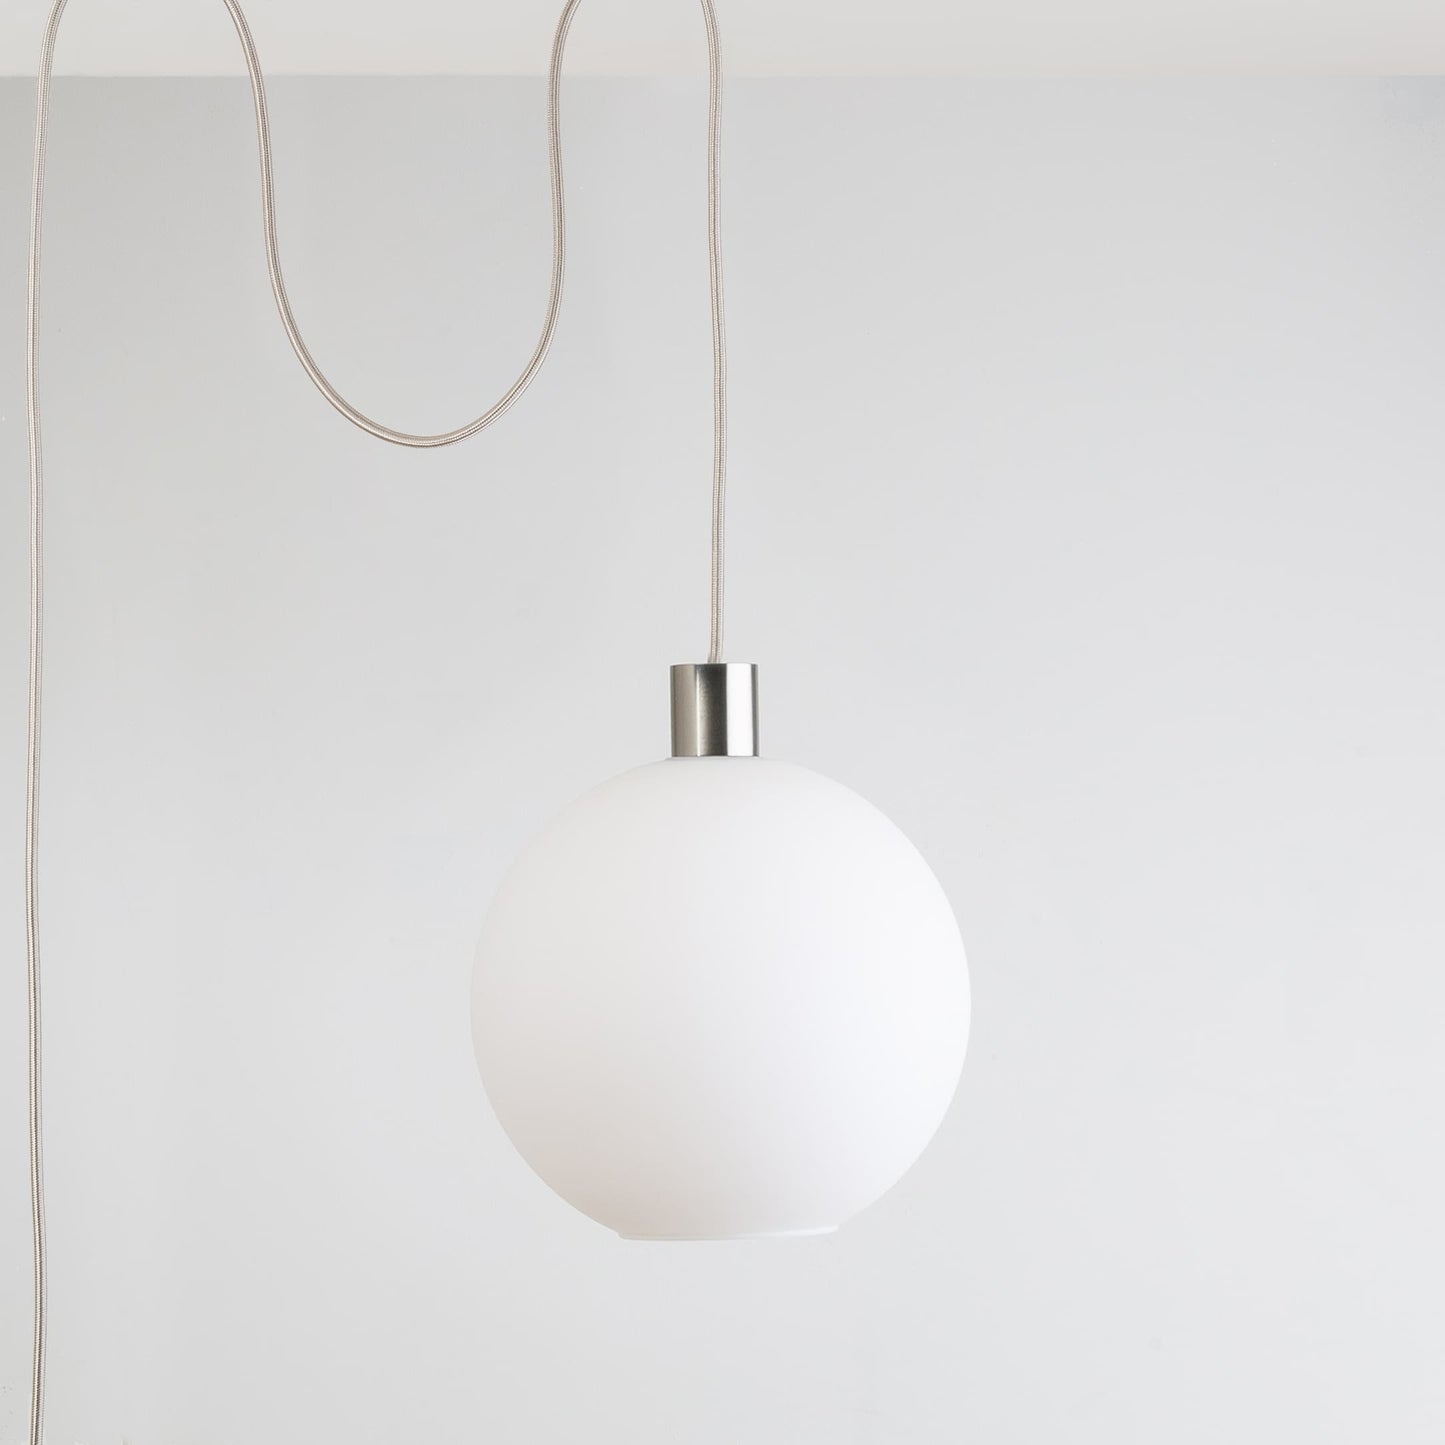 10” All-in-One (AiO) Globe Ceiling Plug-In Pendant